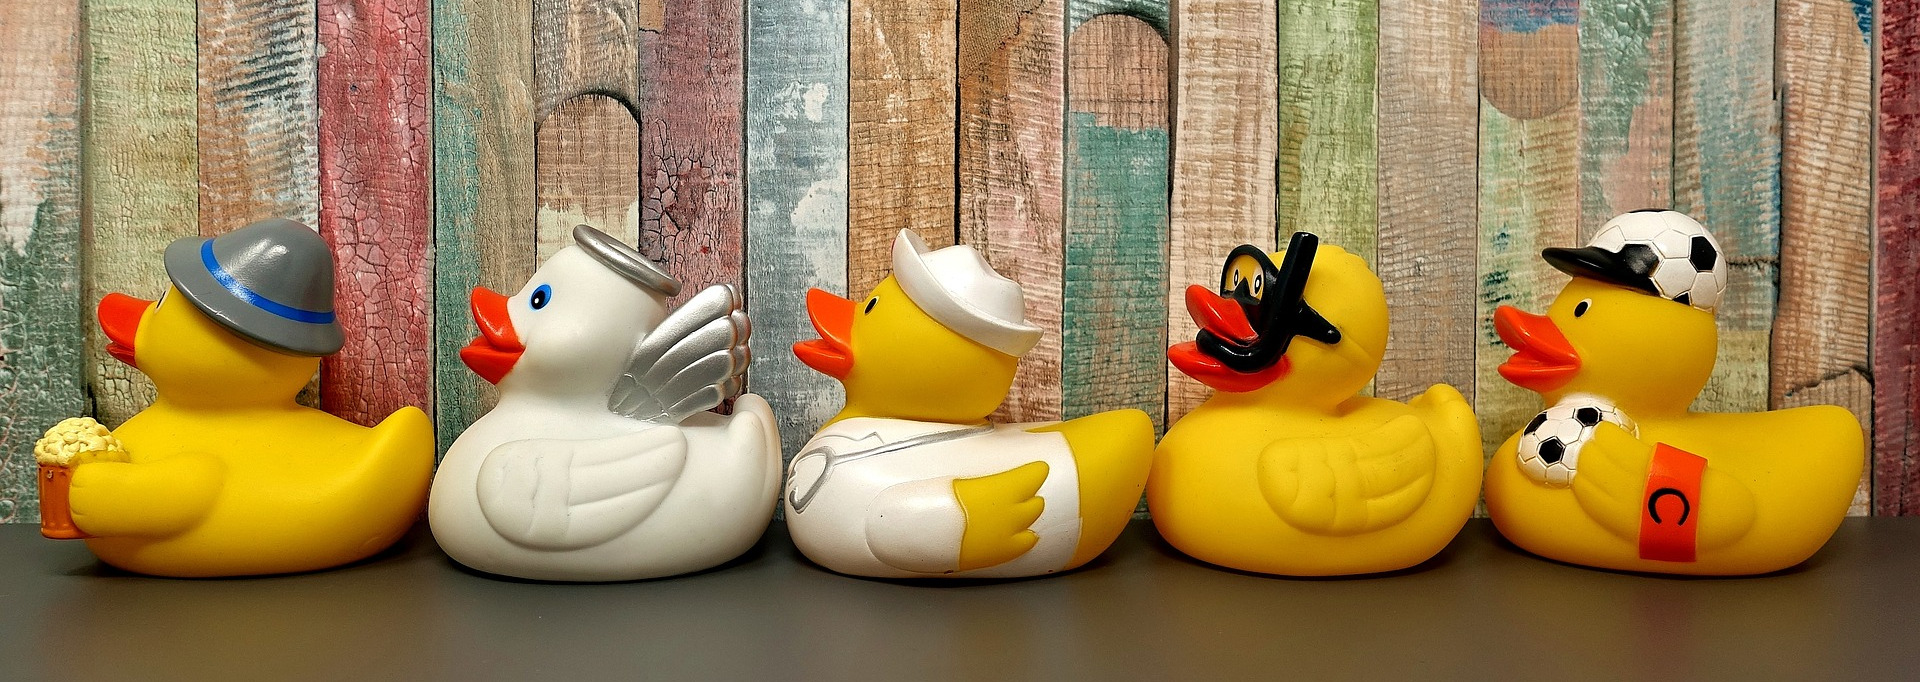 Five rubber ducks, each with different decorations, lined up behind each other